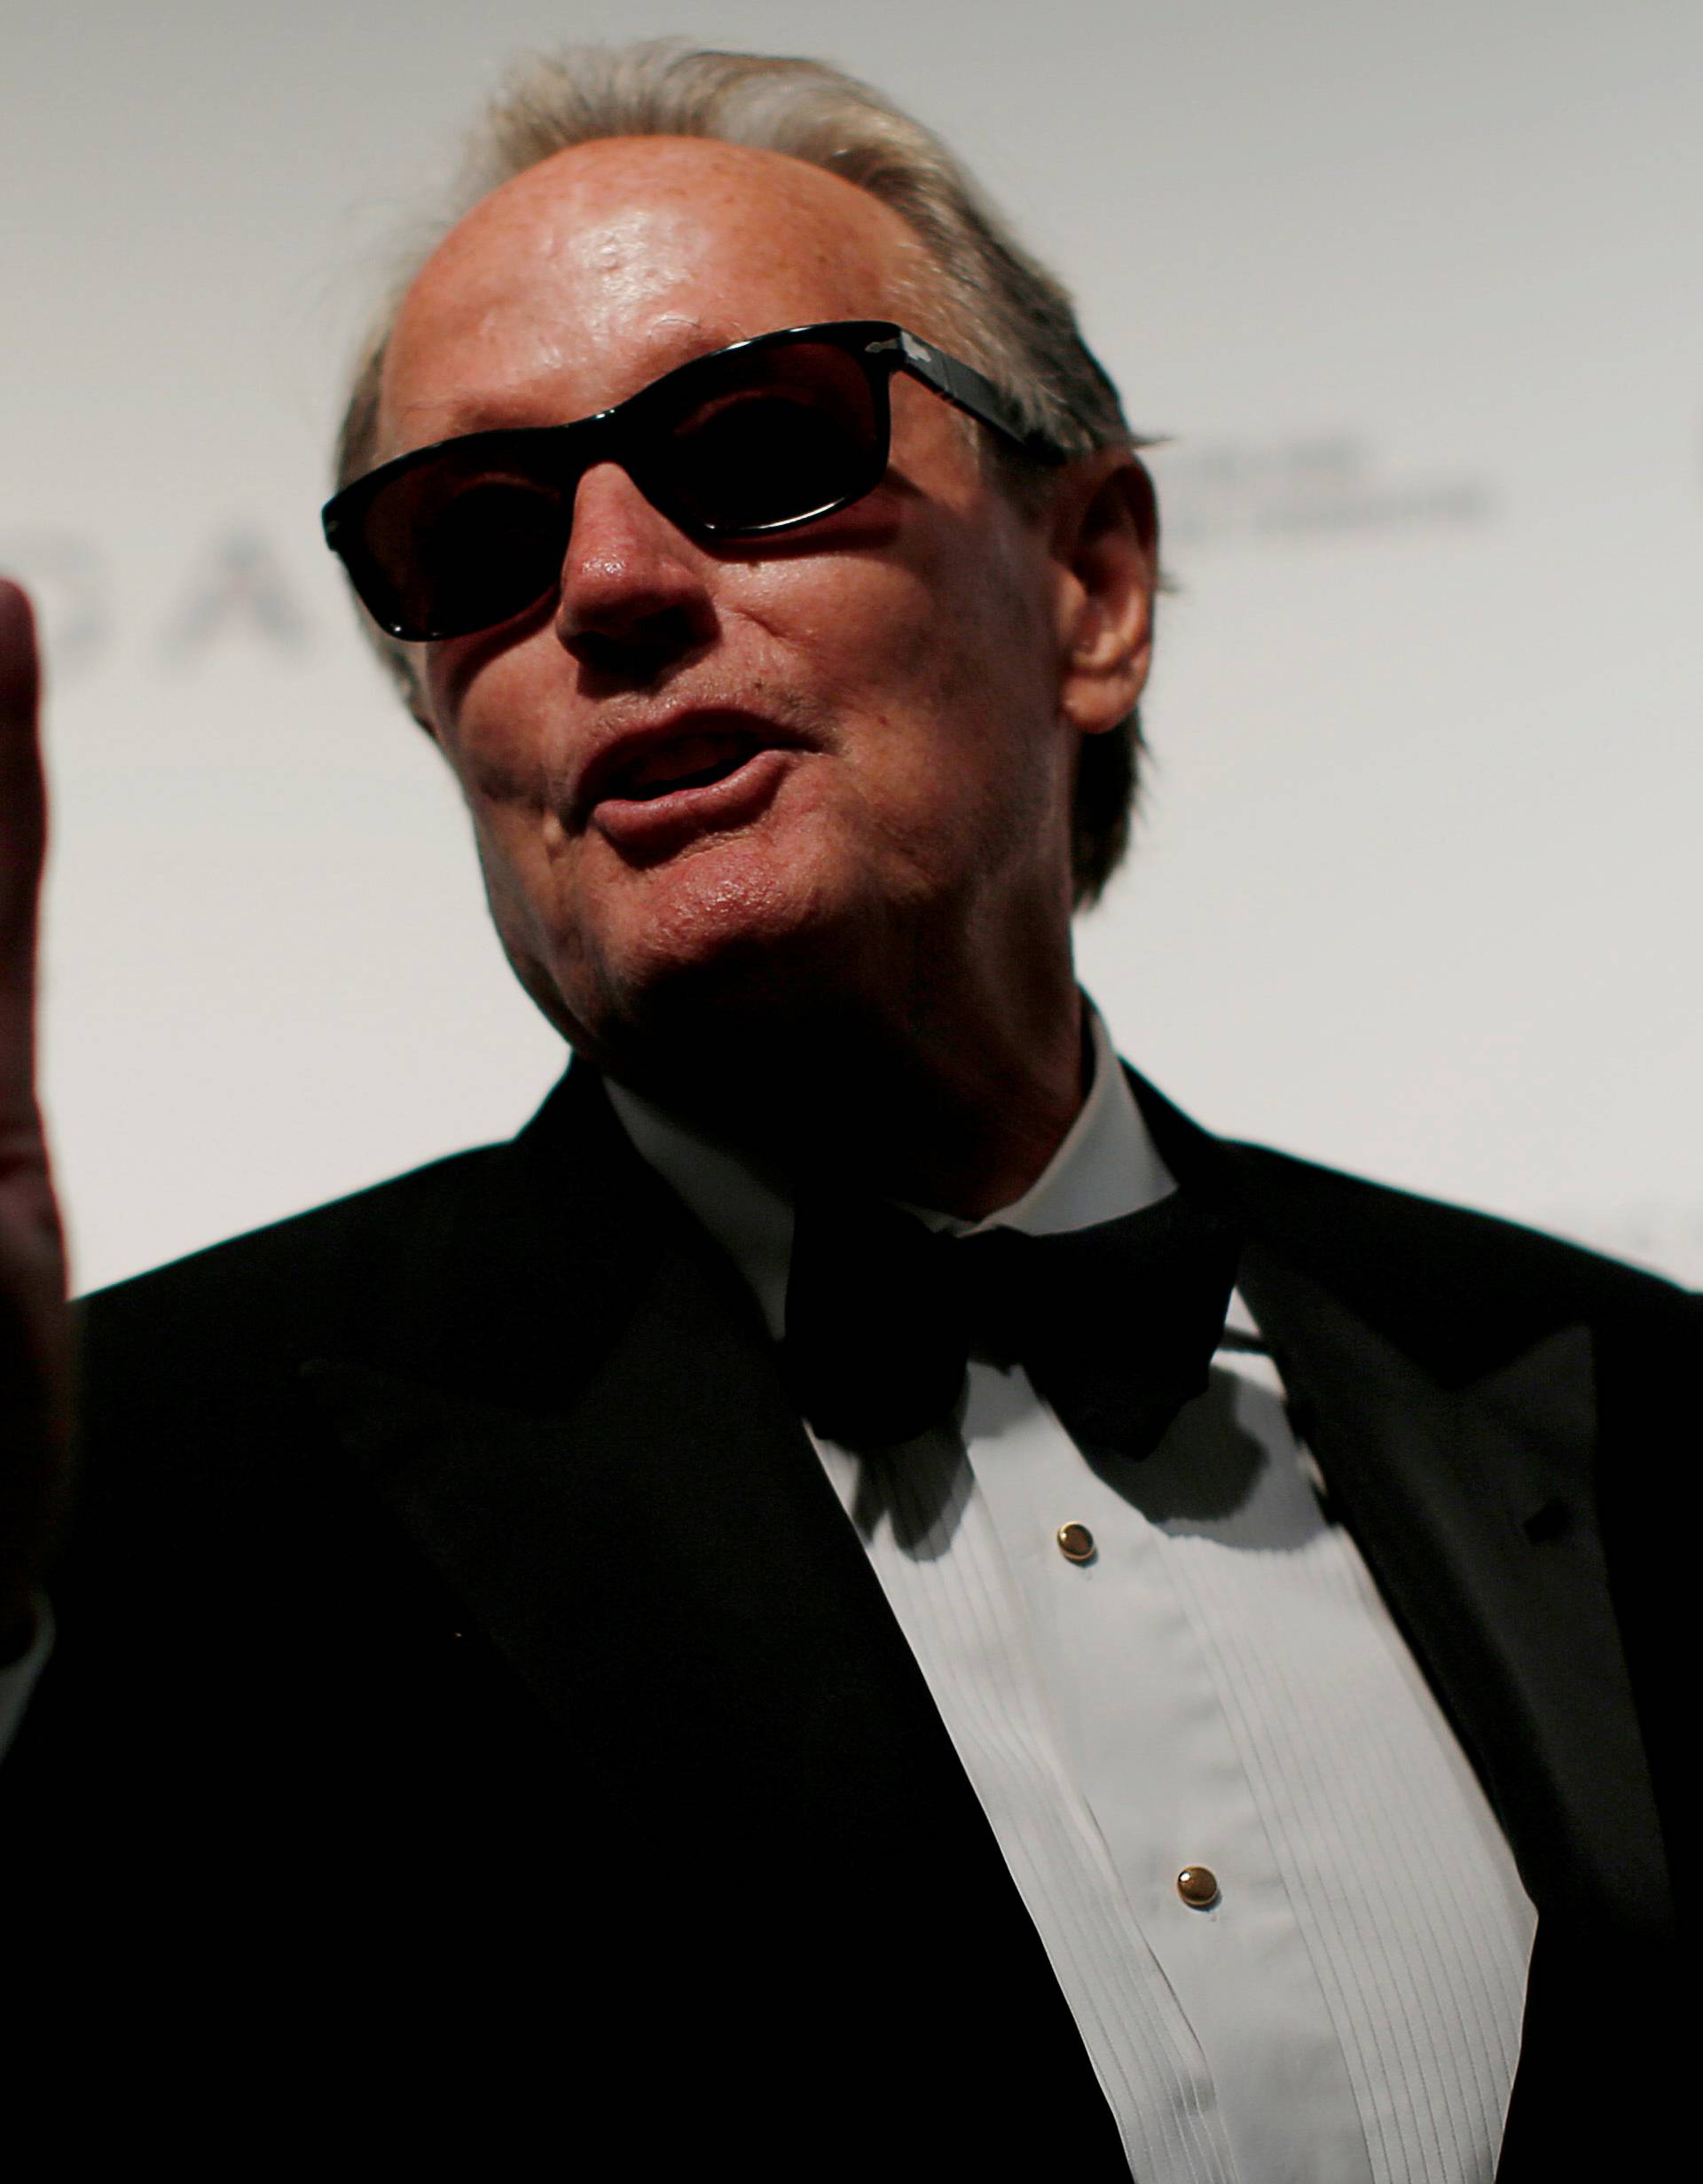 FILE PHOTO: Actor Peter Fonda gestures during the 2017 Elton John AIDS Foundation Academy Awards Viewing Party in Los Angeles, California